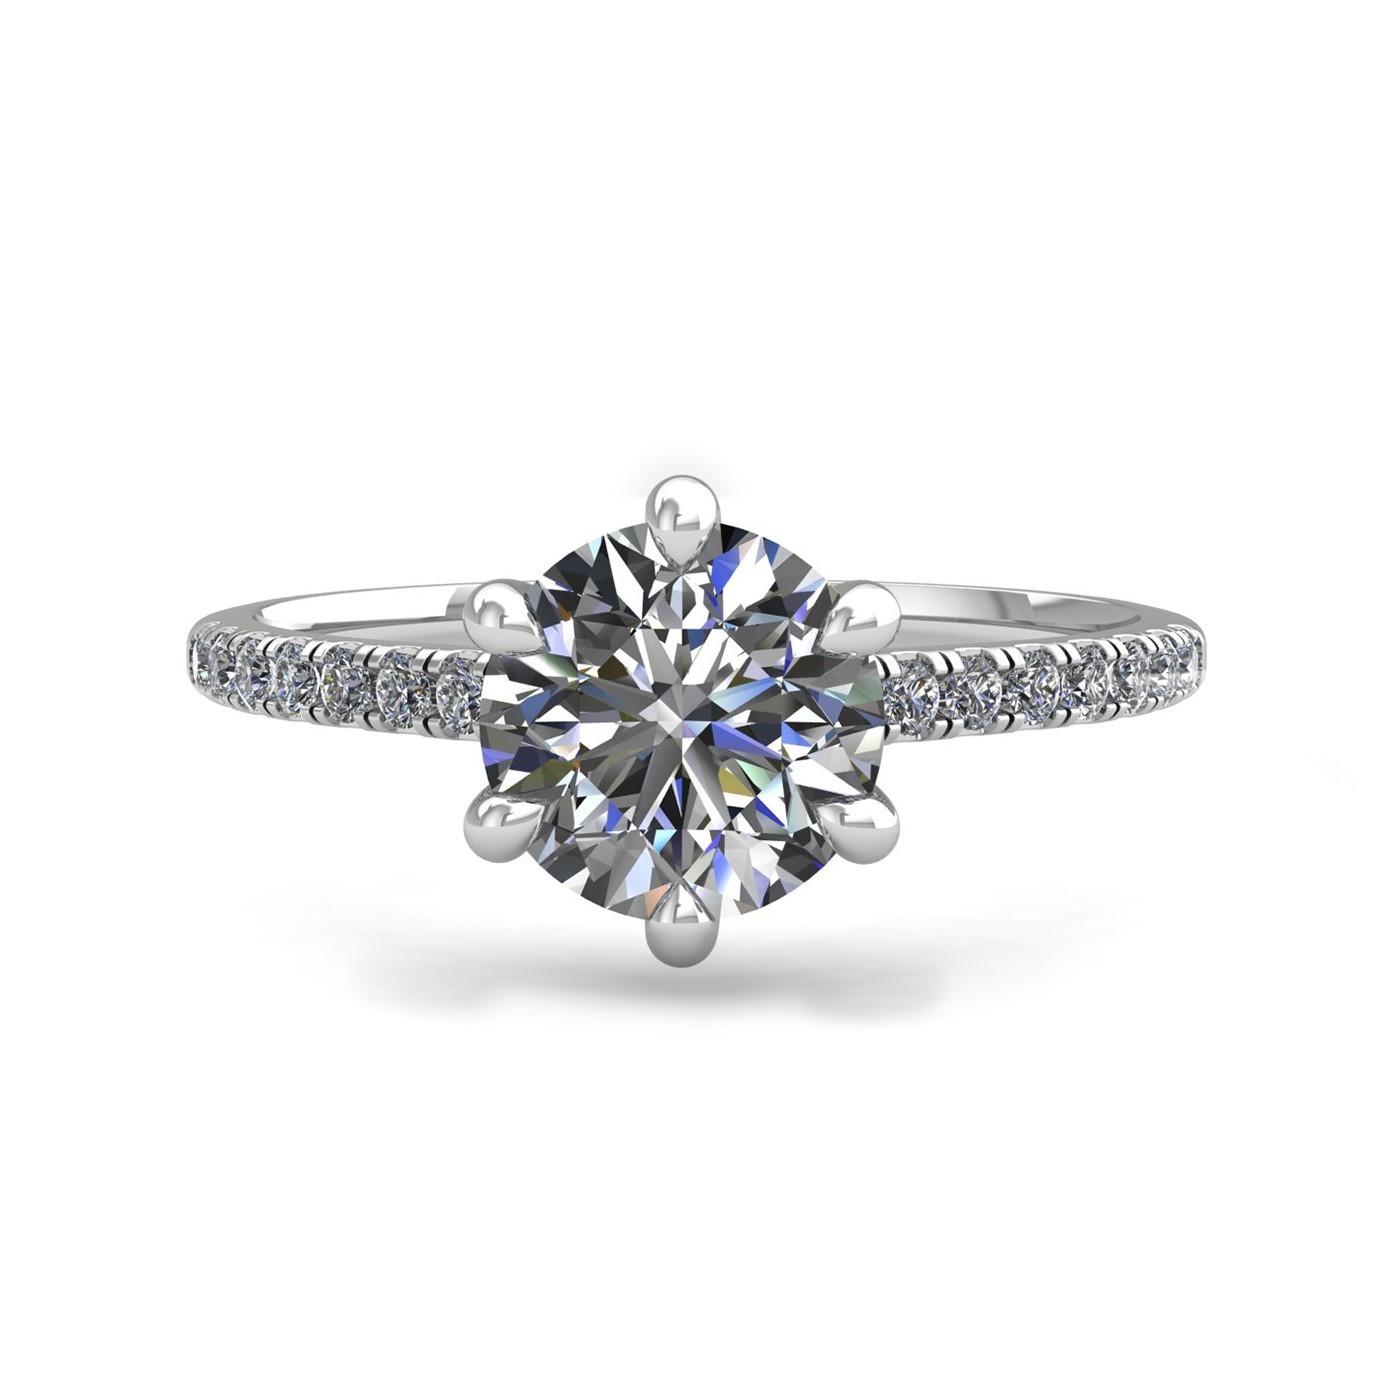 18k white gold 1,00 ct 6 prongs round cut diamond engagement ring with whisper thin pavÉ set band